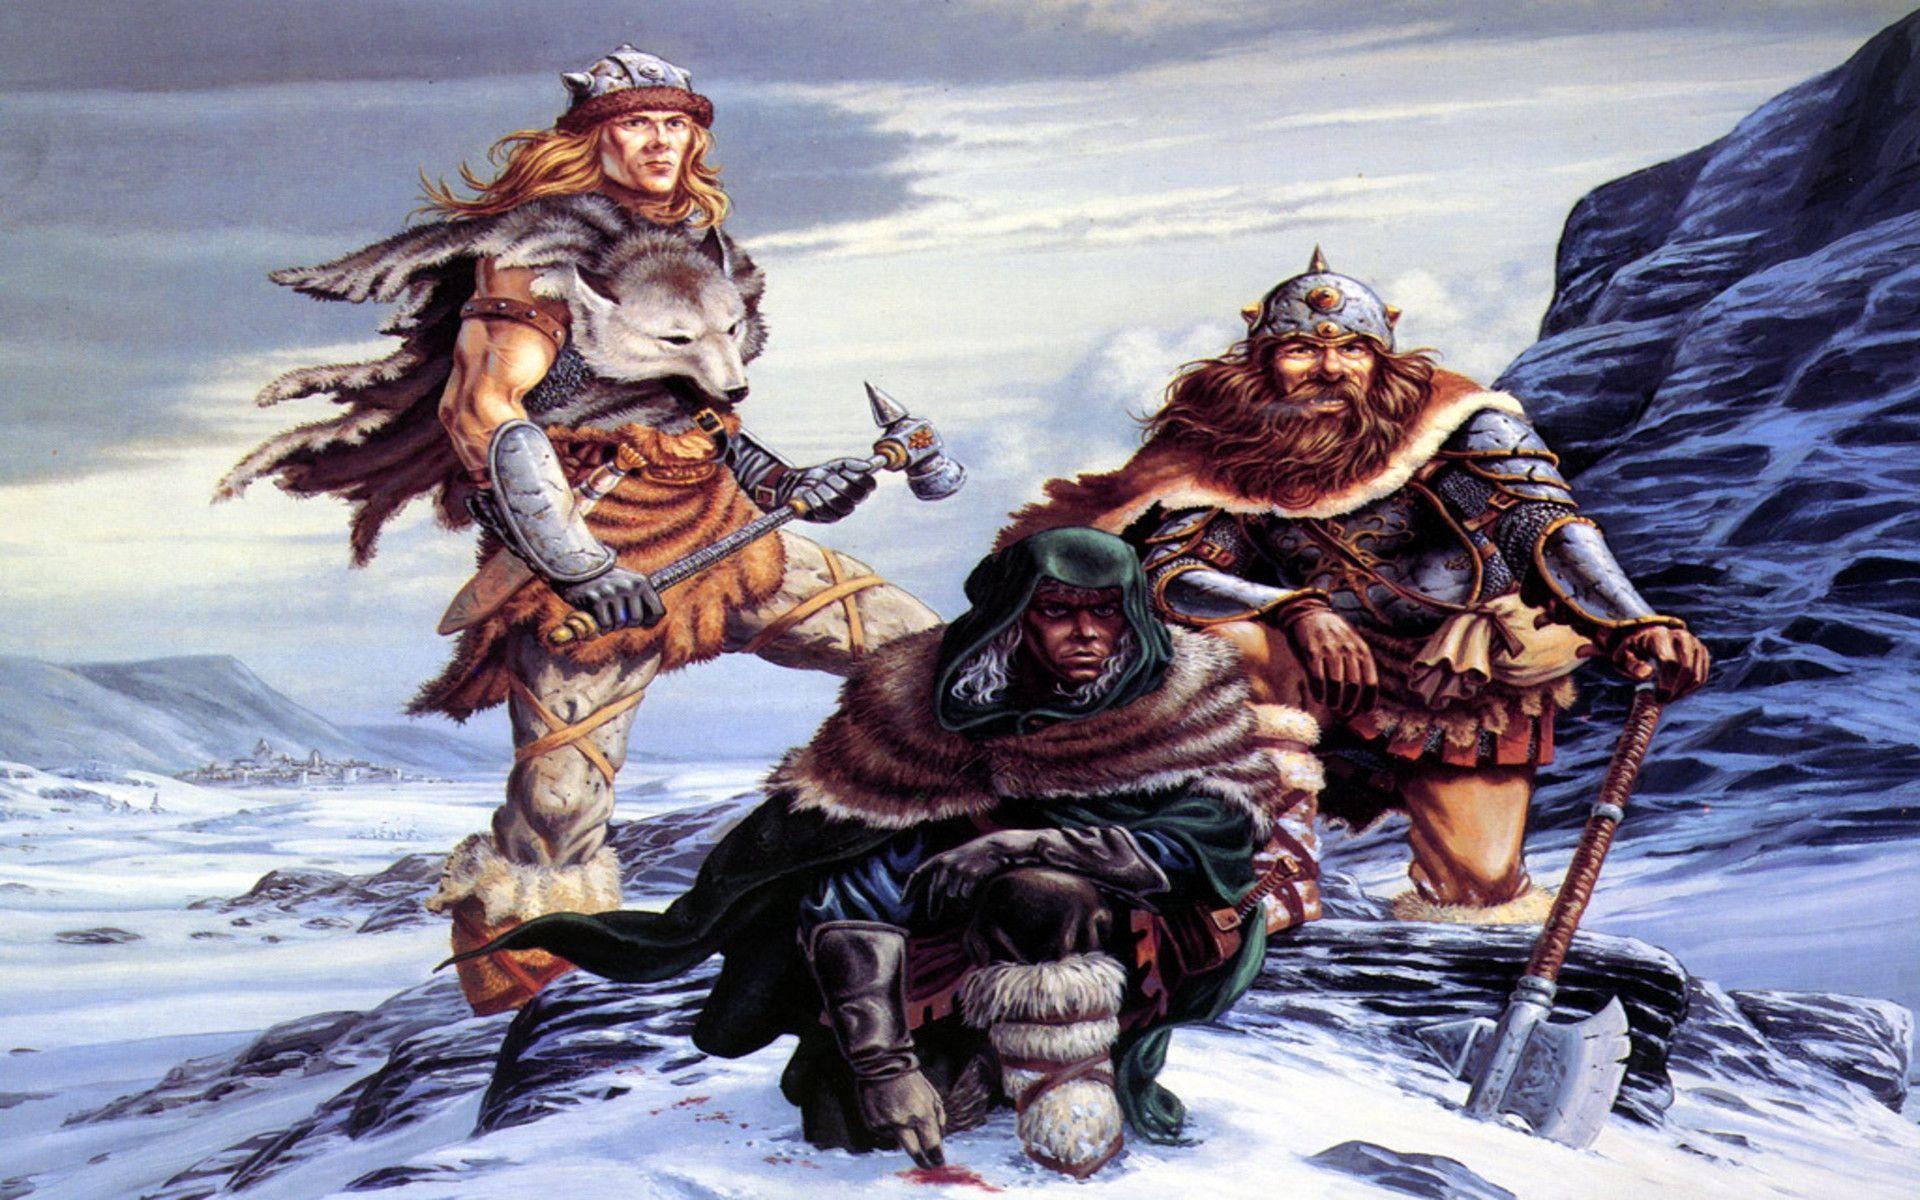 Heroes From Forgotten Realms free background